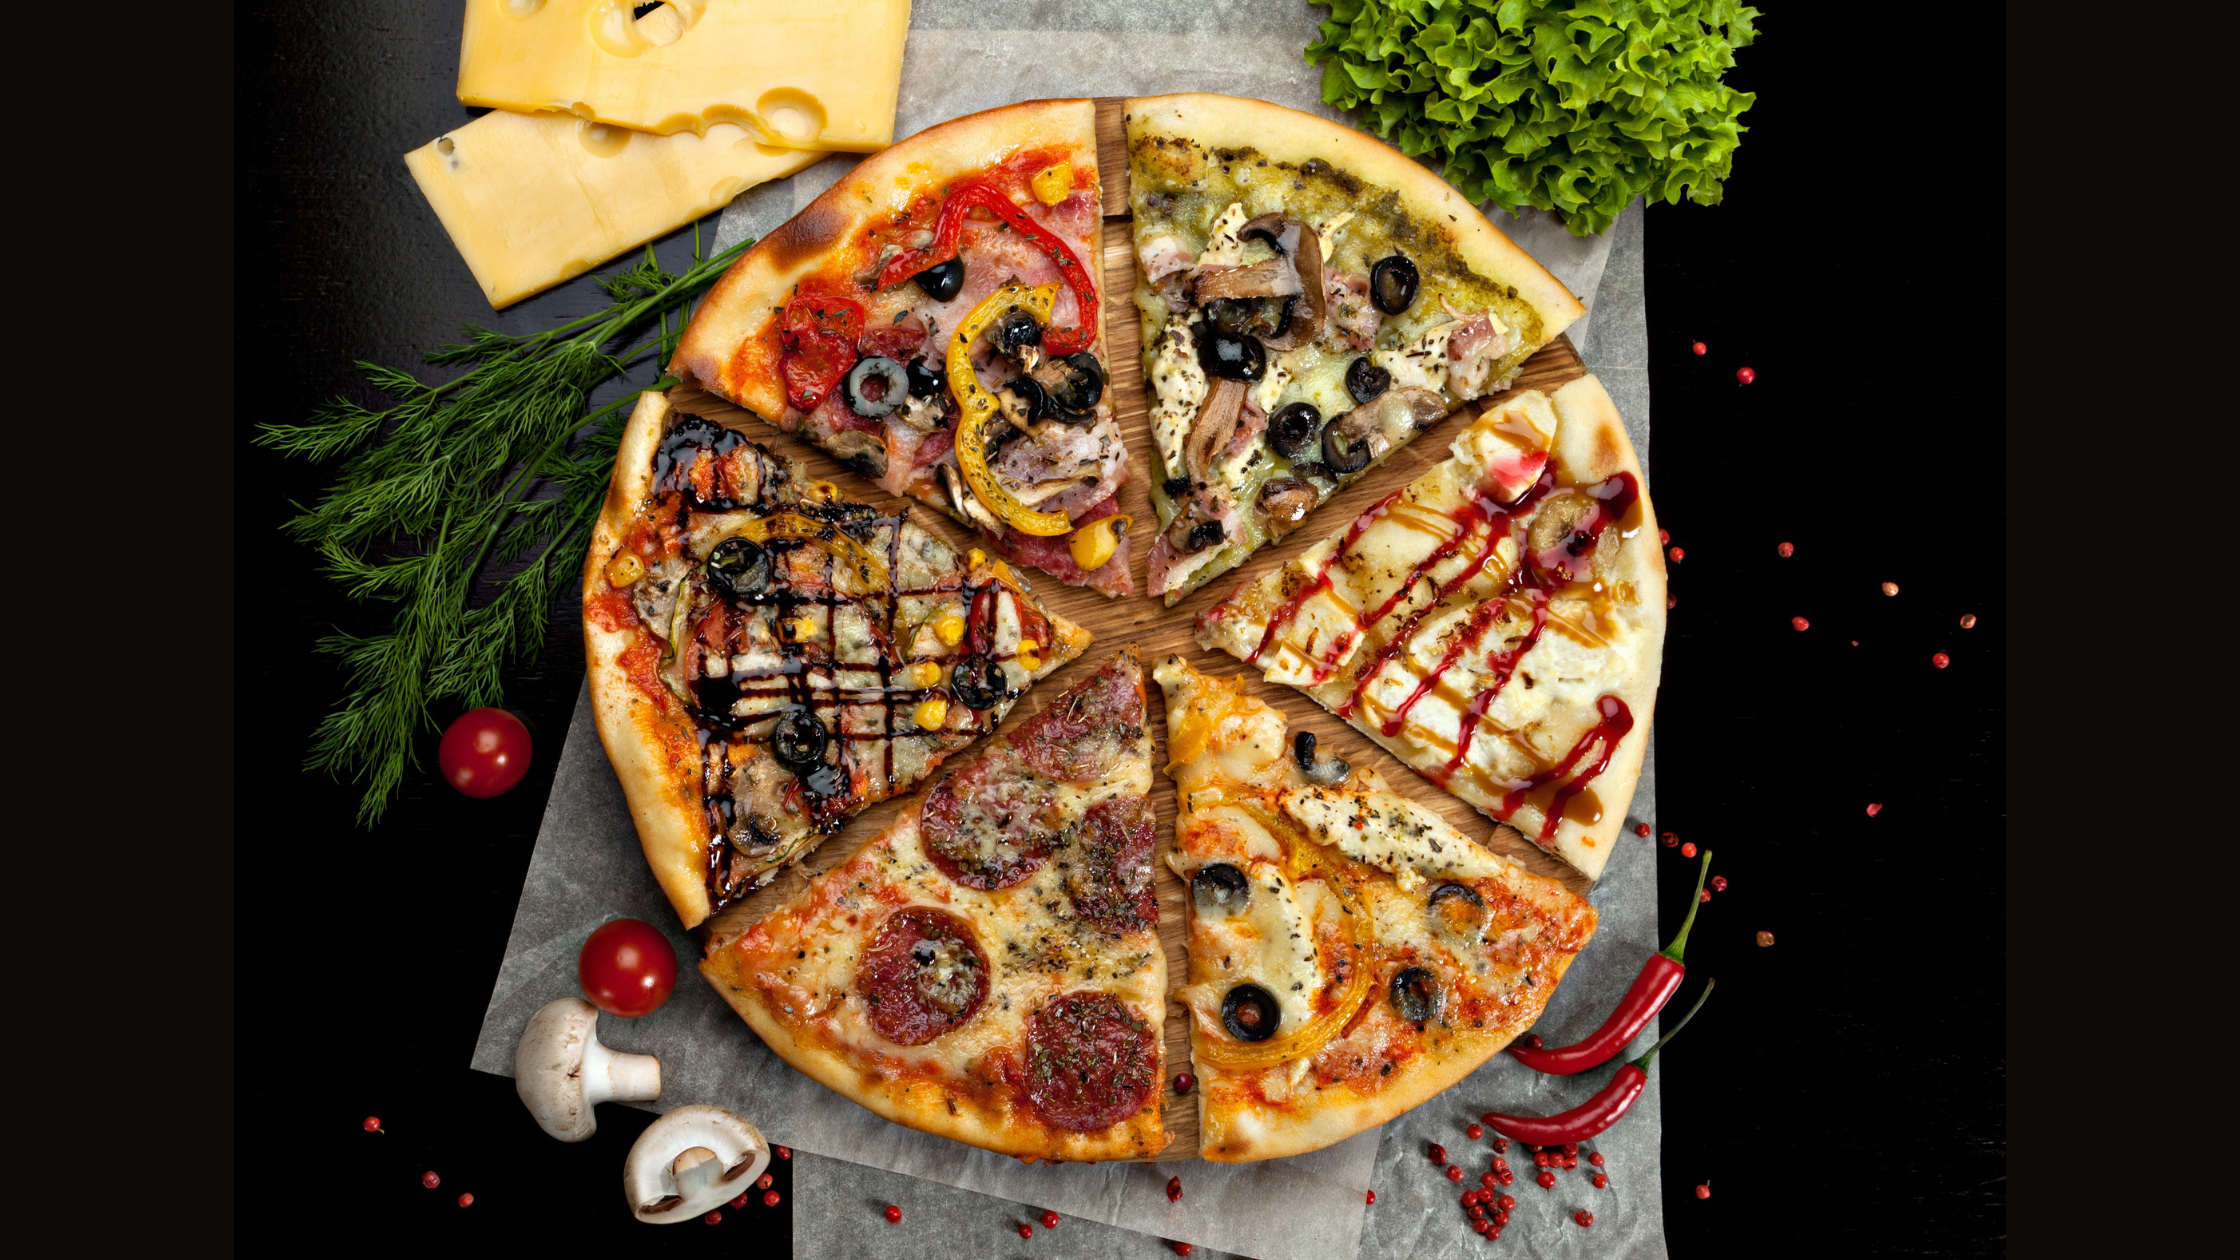 six slices of pizza with a wide variety of different toppings on each piece, arranged in a circle like a regular pizza. The pizza is on a wooden board on black background